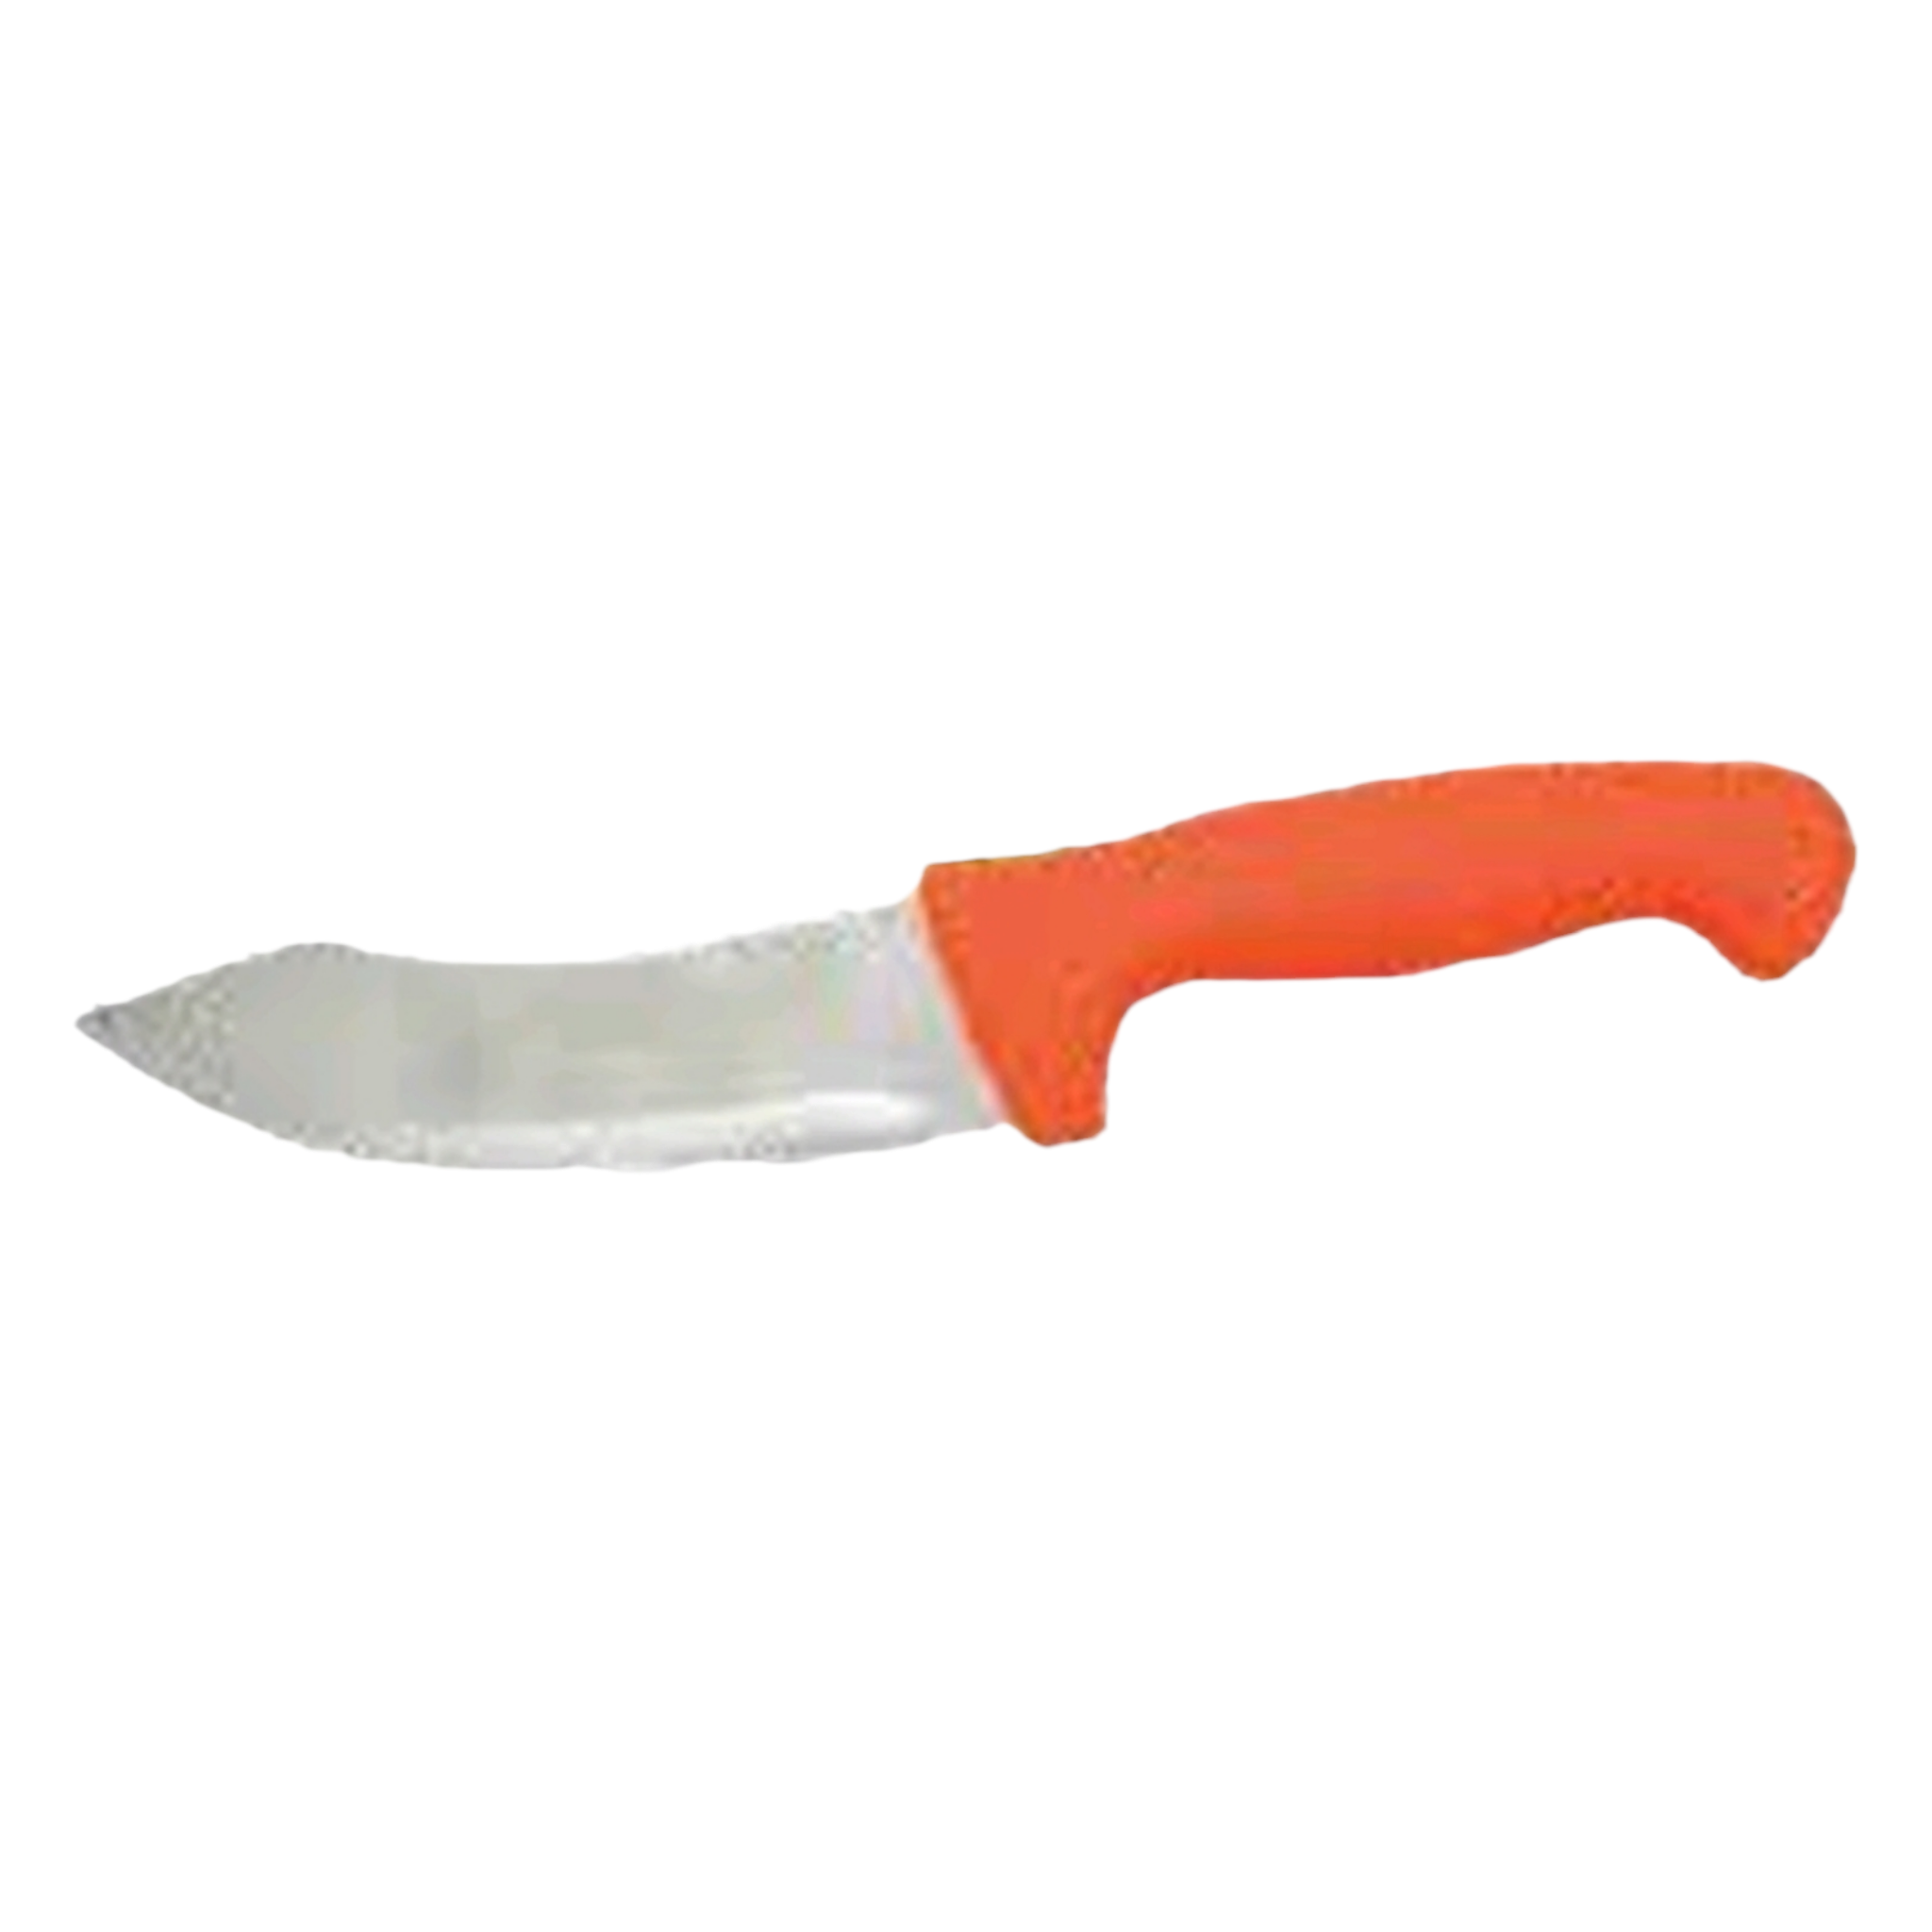 Kitchen Knife Stainless Steel 7Inch 18cm KN0267-7